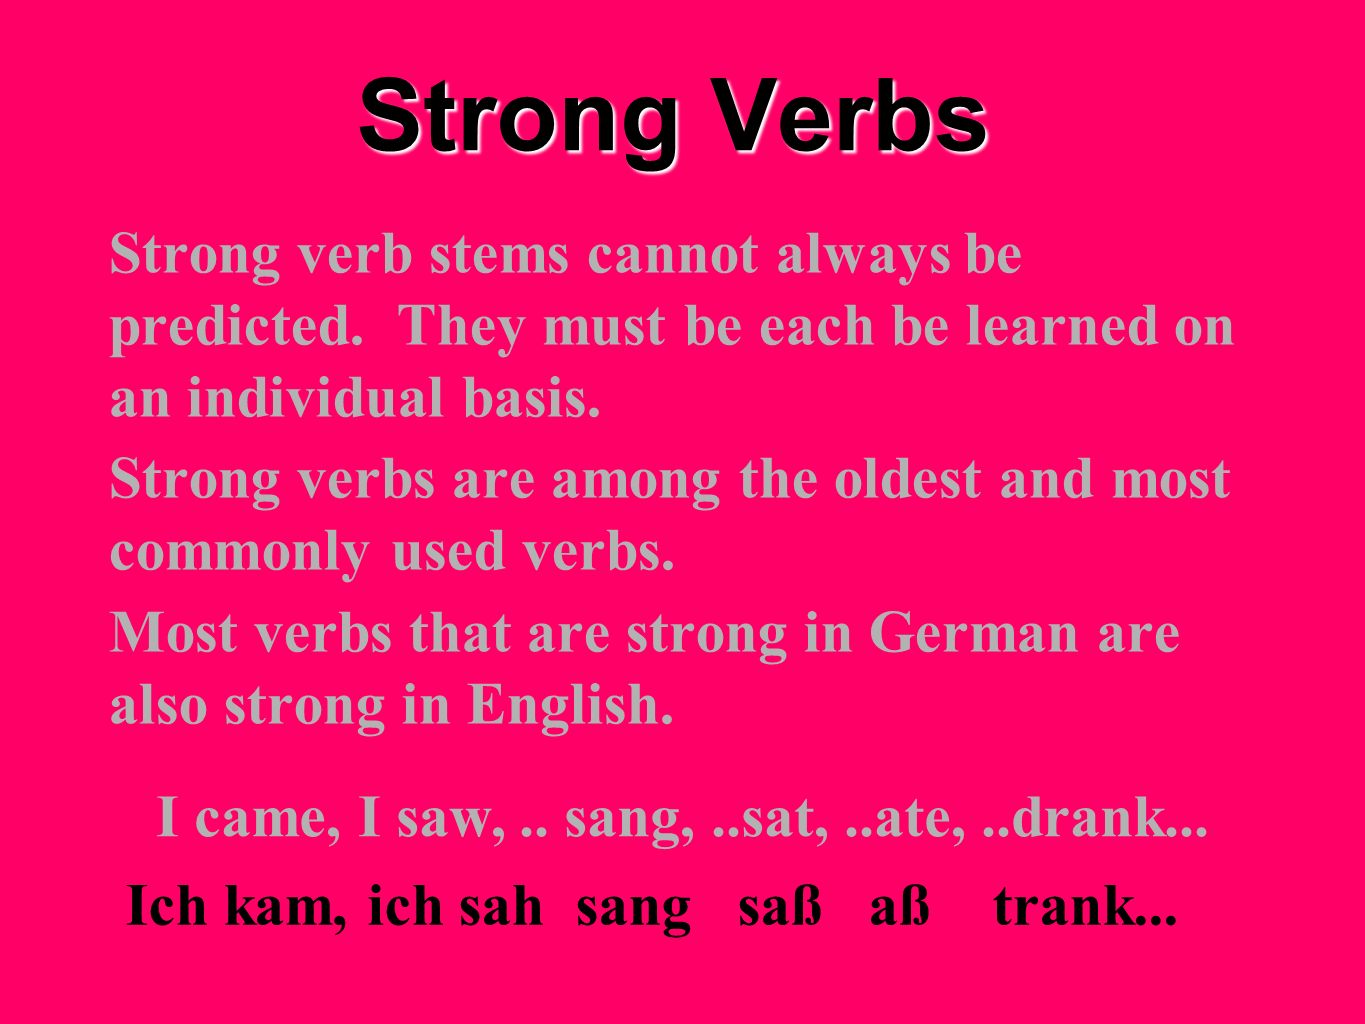 Strong Verbs Strong verb stems cannot always be predicted. They must be each be learned on an individual basis.